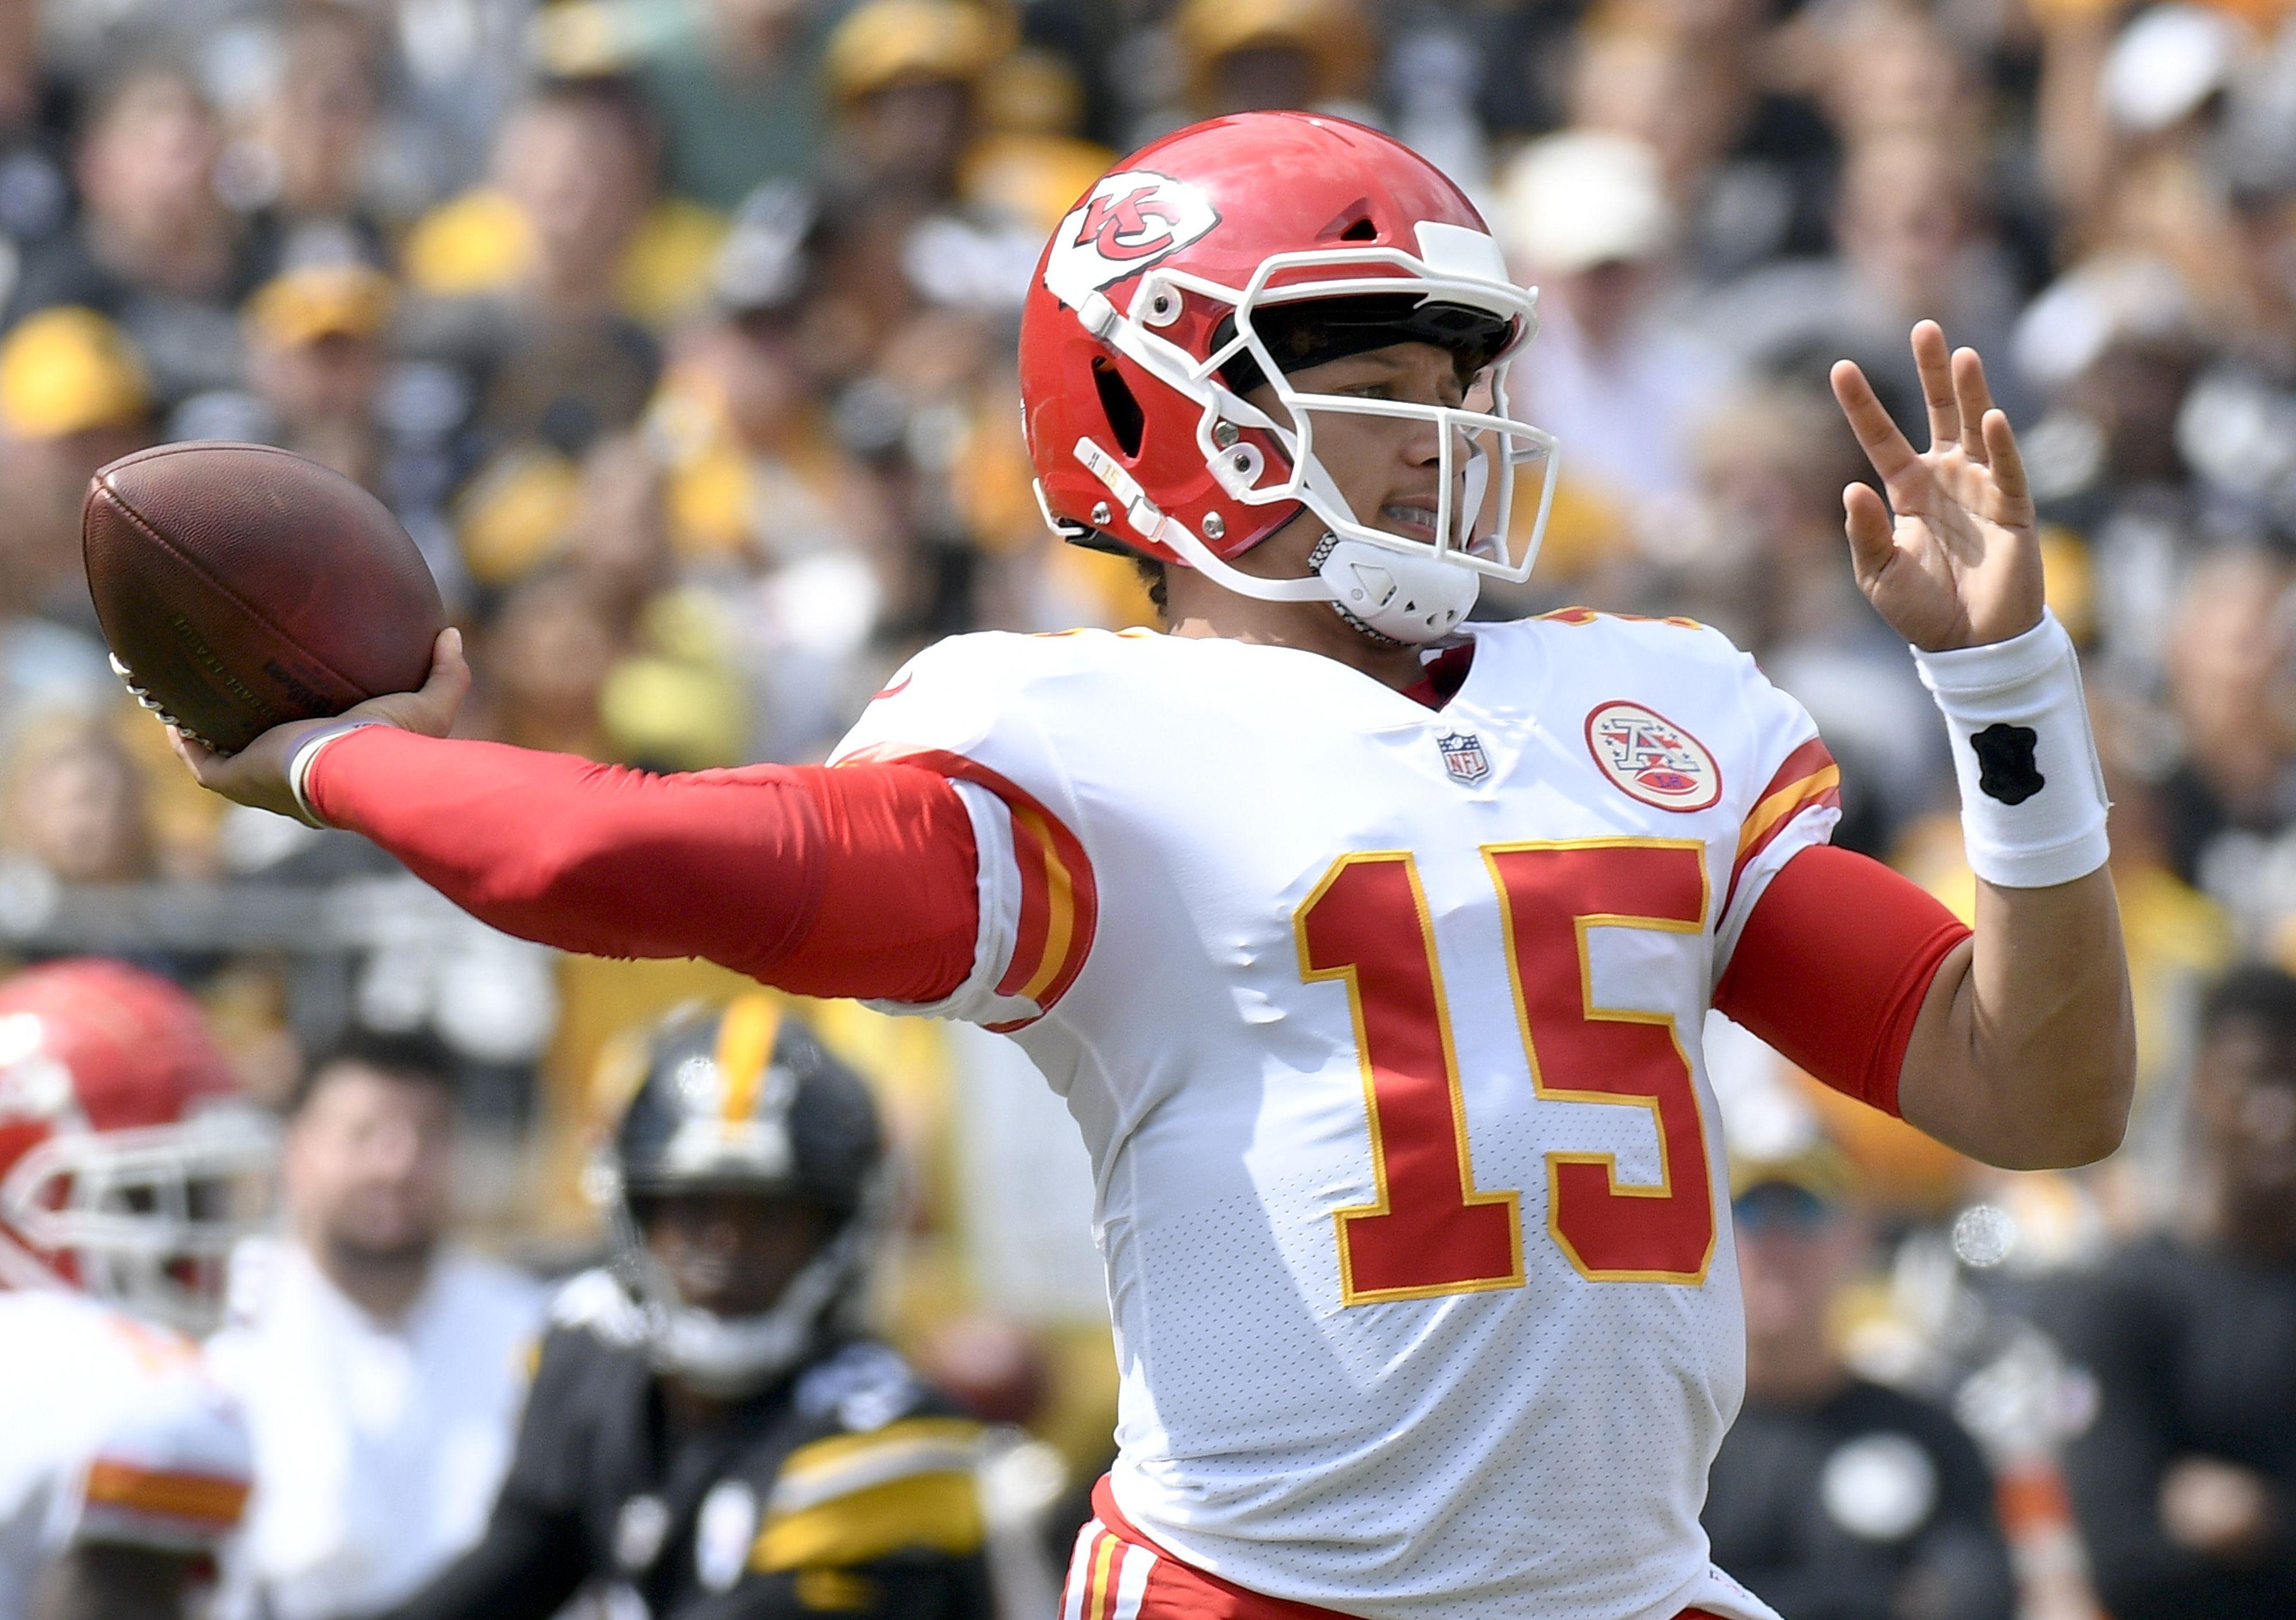 Next up for 49ers: Unstoppable Patrick Mahomes and Chiefs